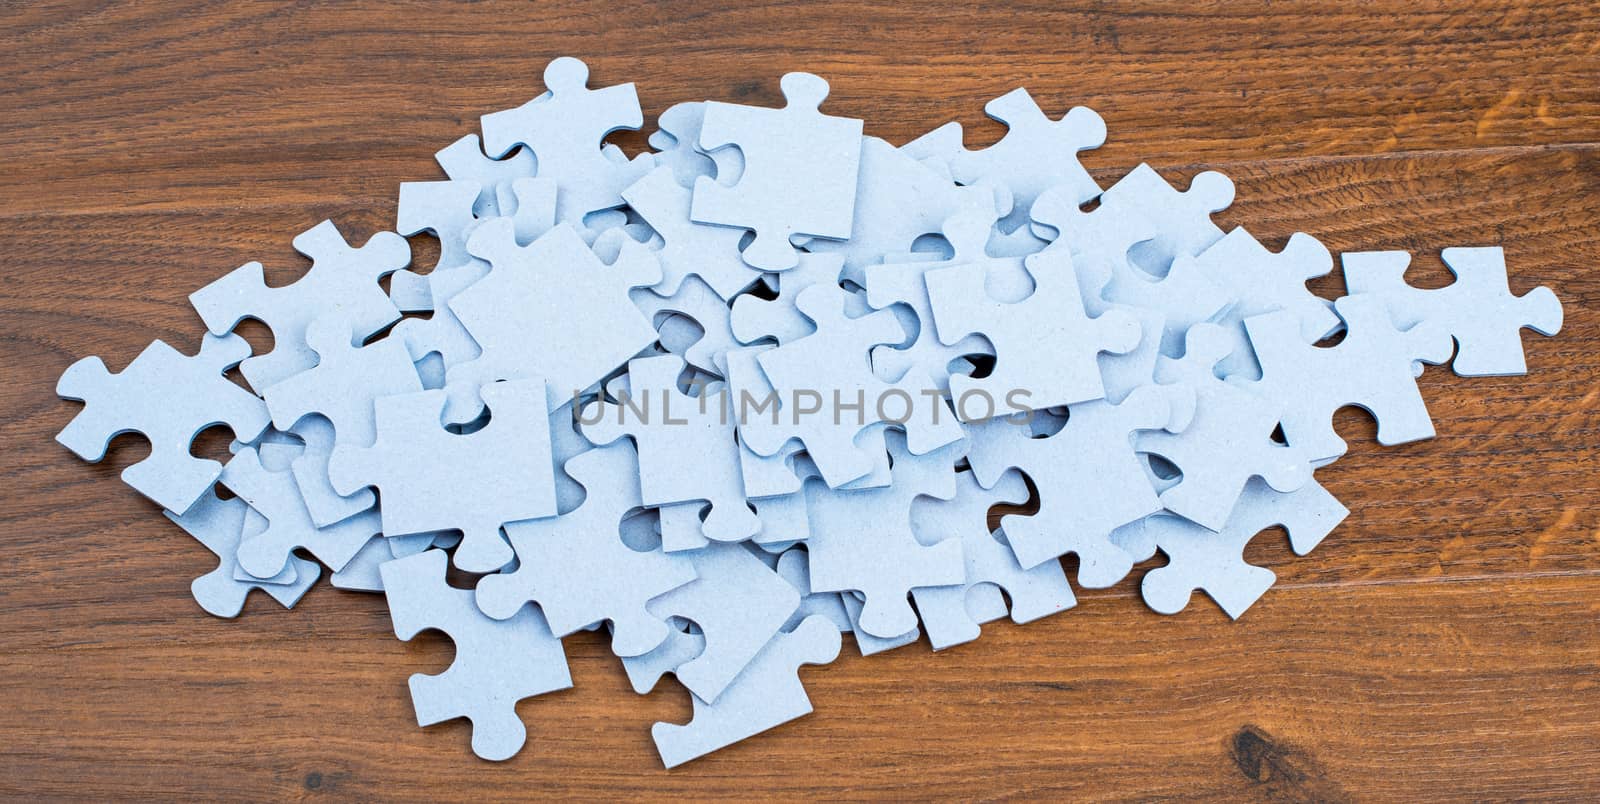 Pile of puzzle pieces on table, top view